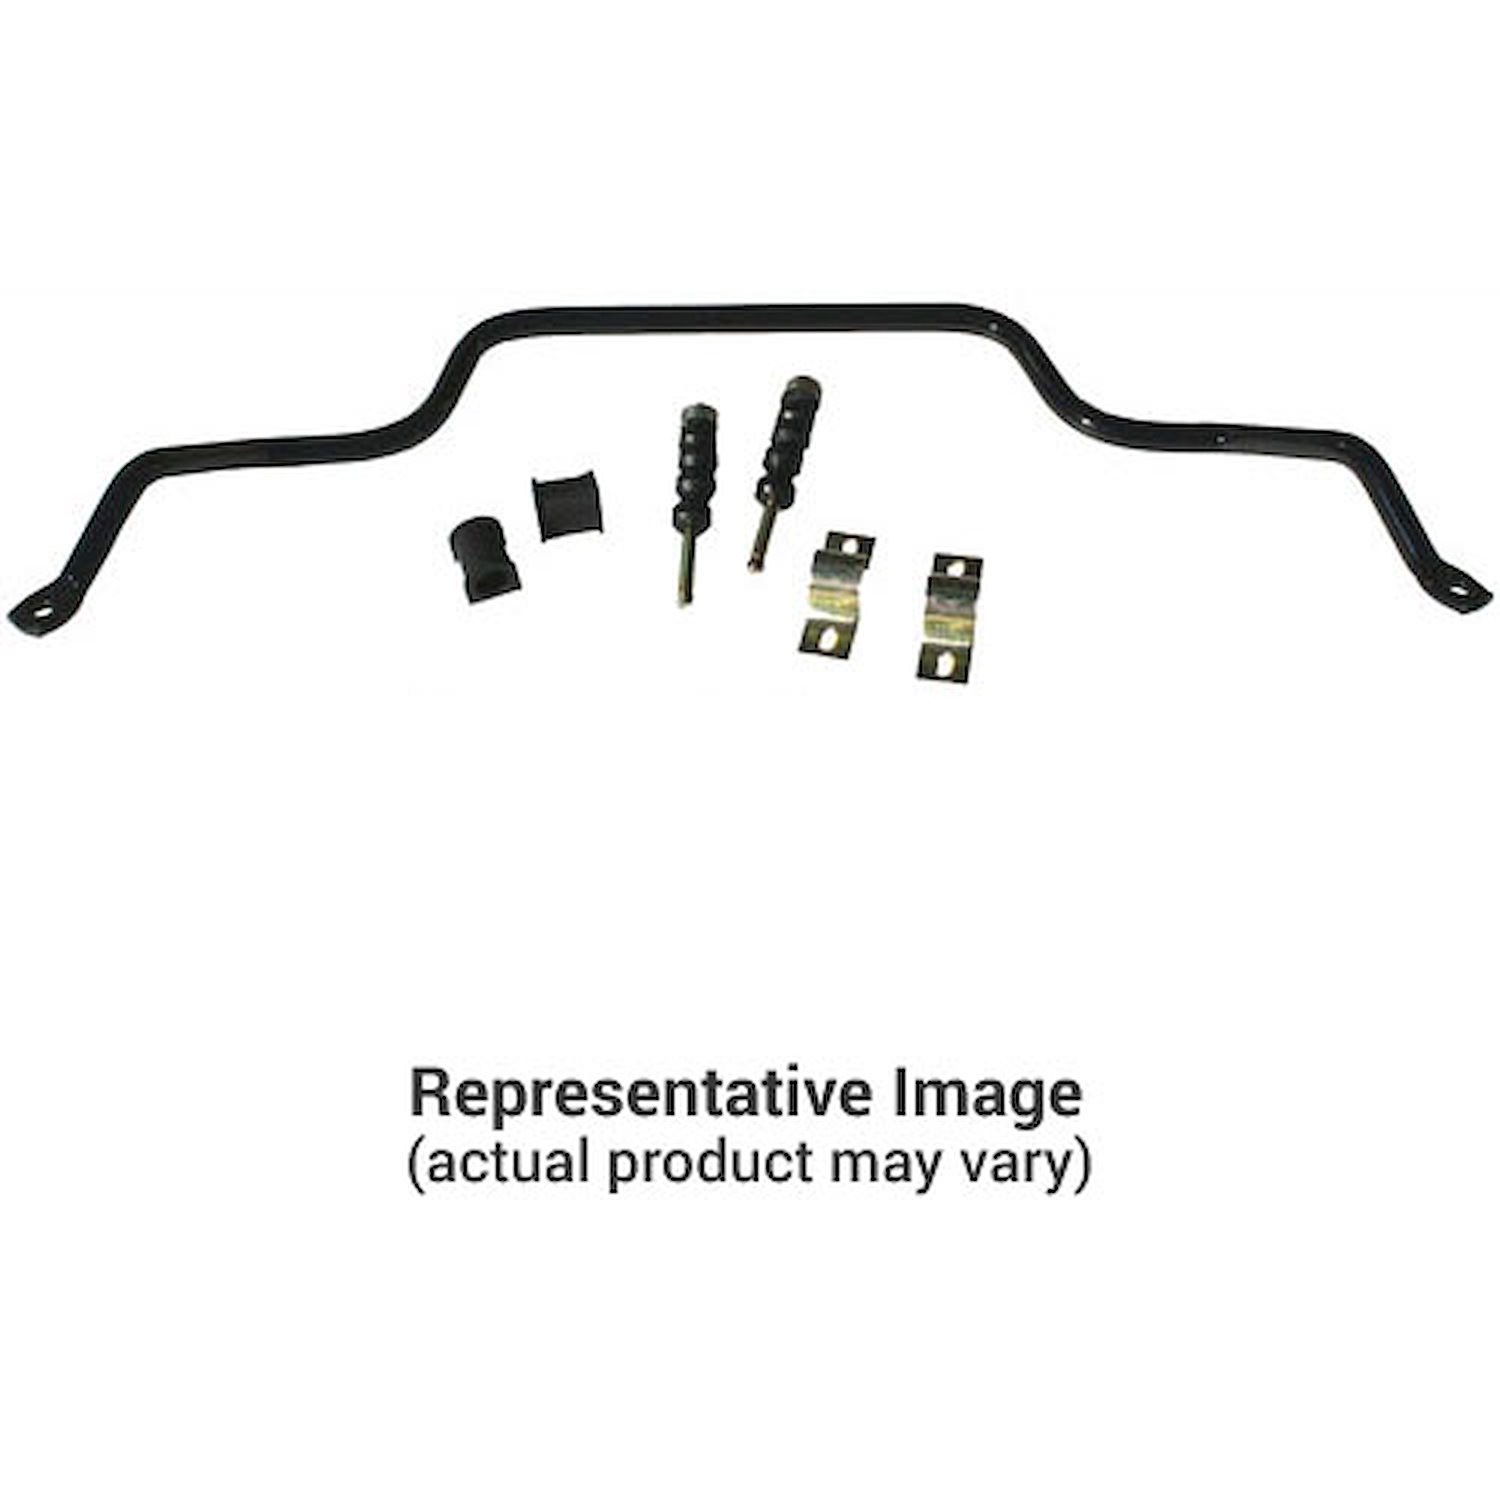 1 1/8" Front Sway Bar 1980-92 Ford F-350 2WD